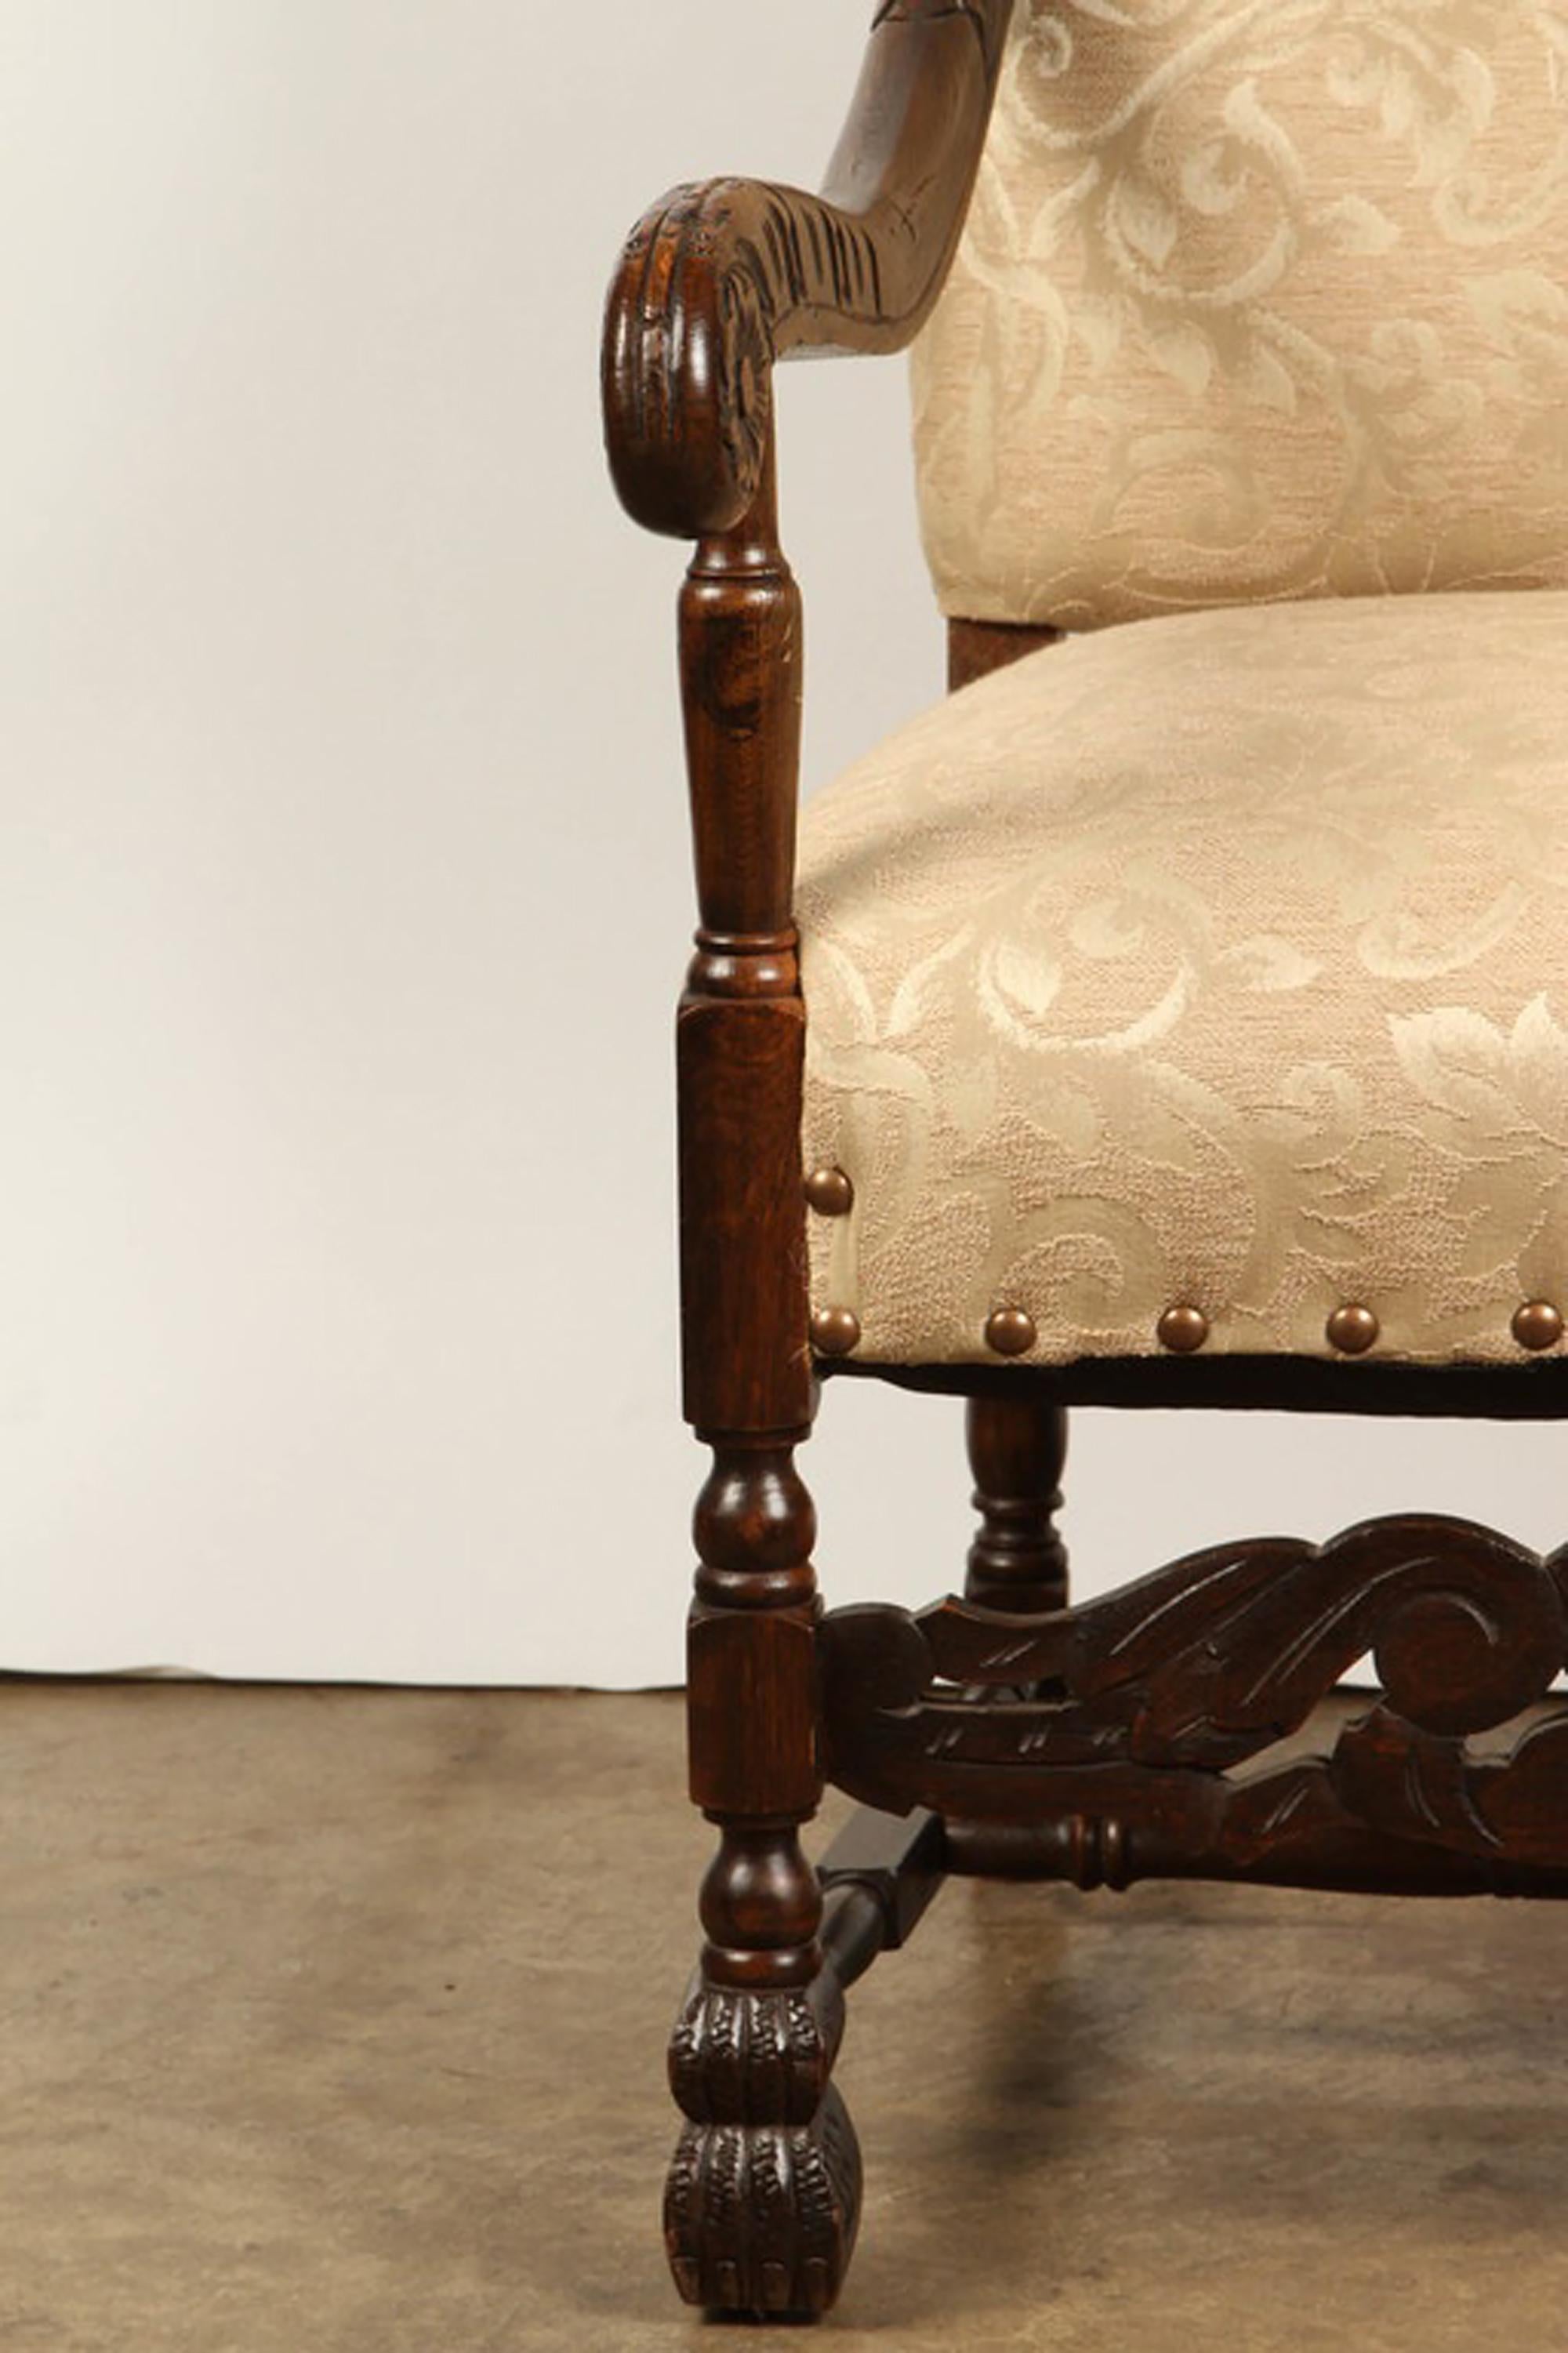 An early 20th Century carved oak Danish baroque revival chair. The upholstery for this Danish revival chair is new. It has a leaf and vine pattern in light shades of cream and white, and rows of golden studs at the bottom edges of the seat. The